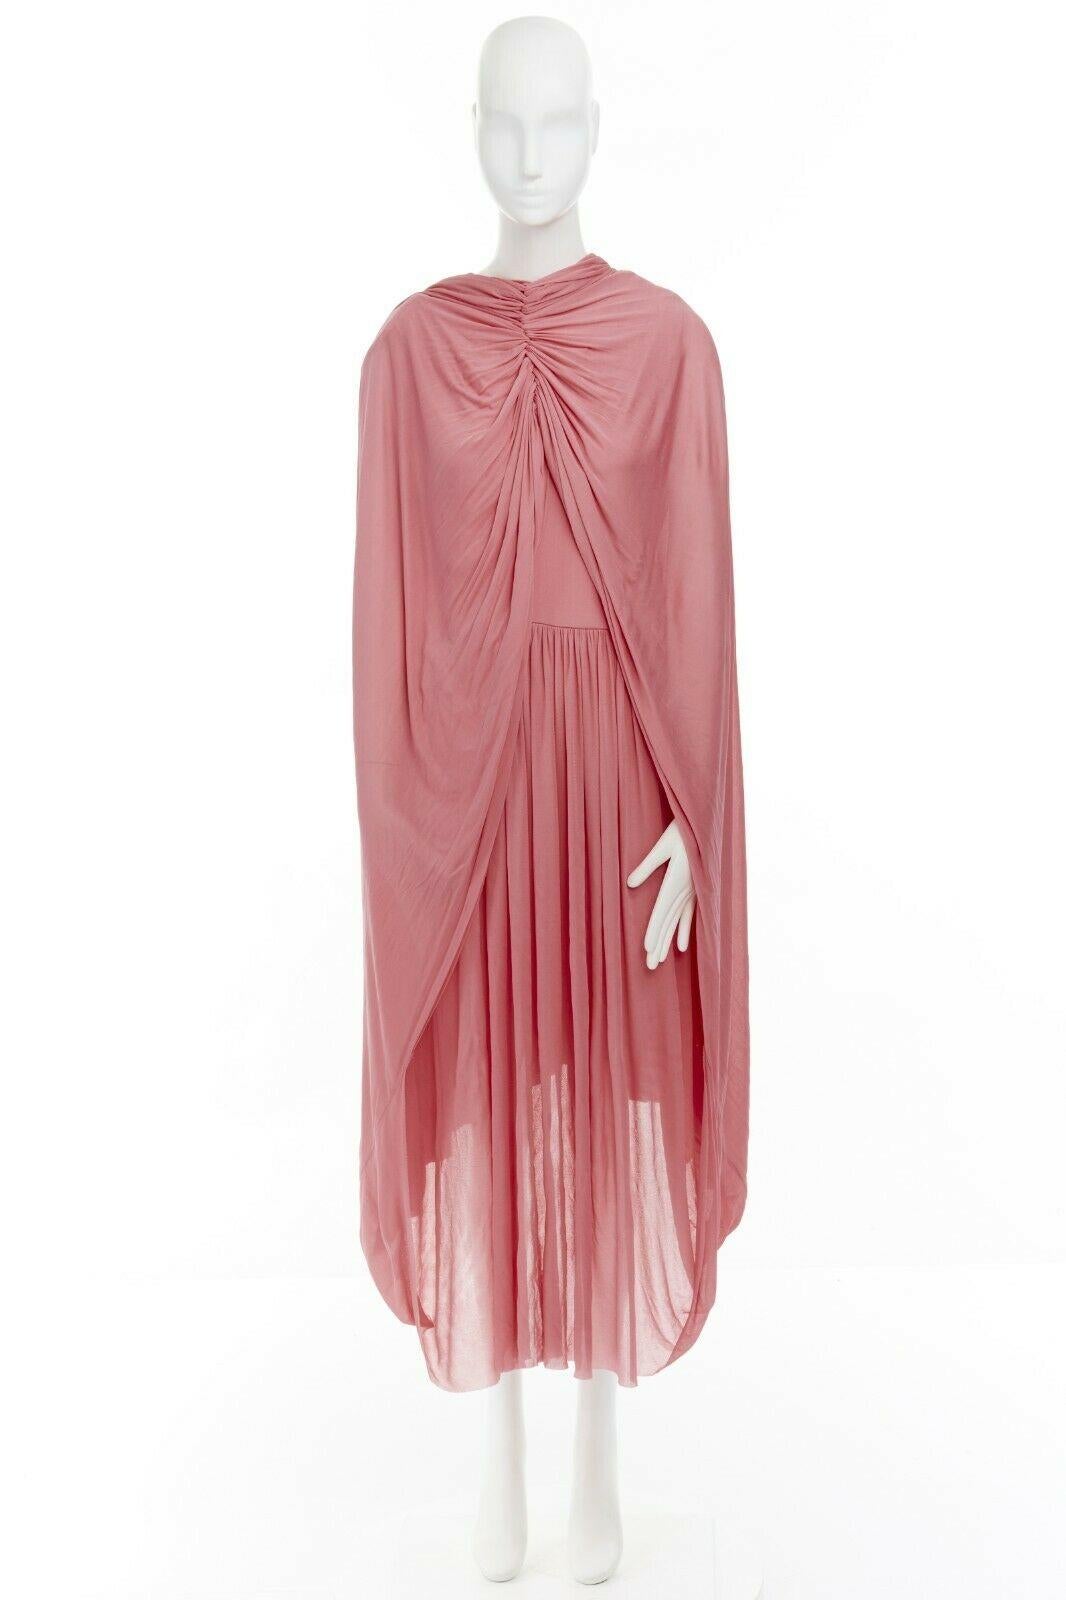 CELINE BY PHOEBE PHILO
Fluid cape dress. Pink viscose. V-neck. Sleeveless. Pleated skirt. Attached cape detail at skirt to be worn around neck. Concealed zip closure. Midi length. 
Made in France.

SIZING 
Designer size: FR36
Size reference: US0 /